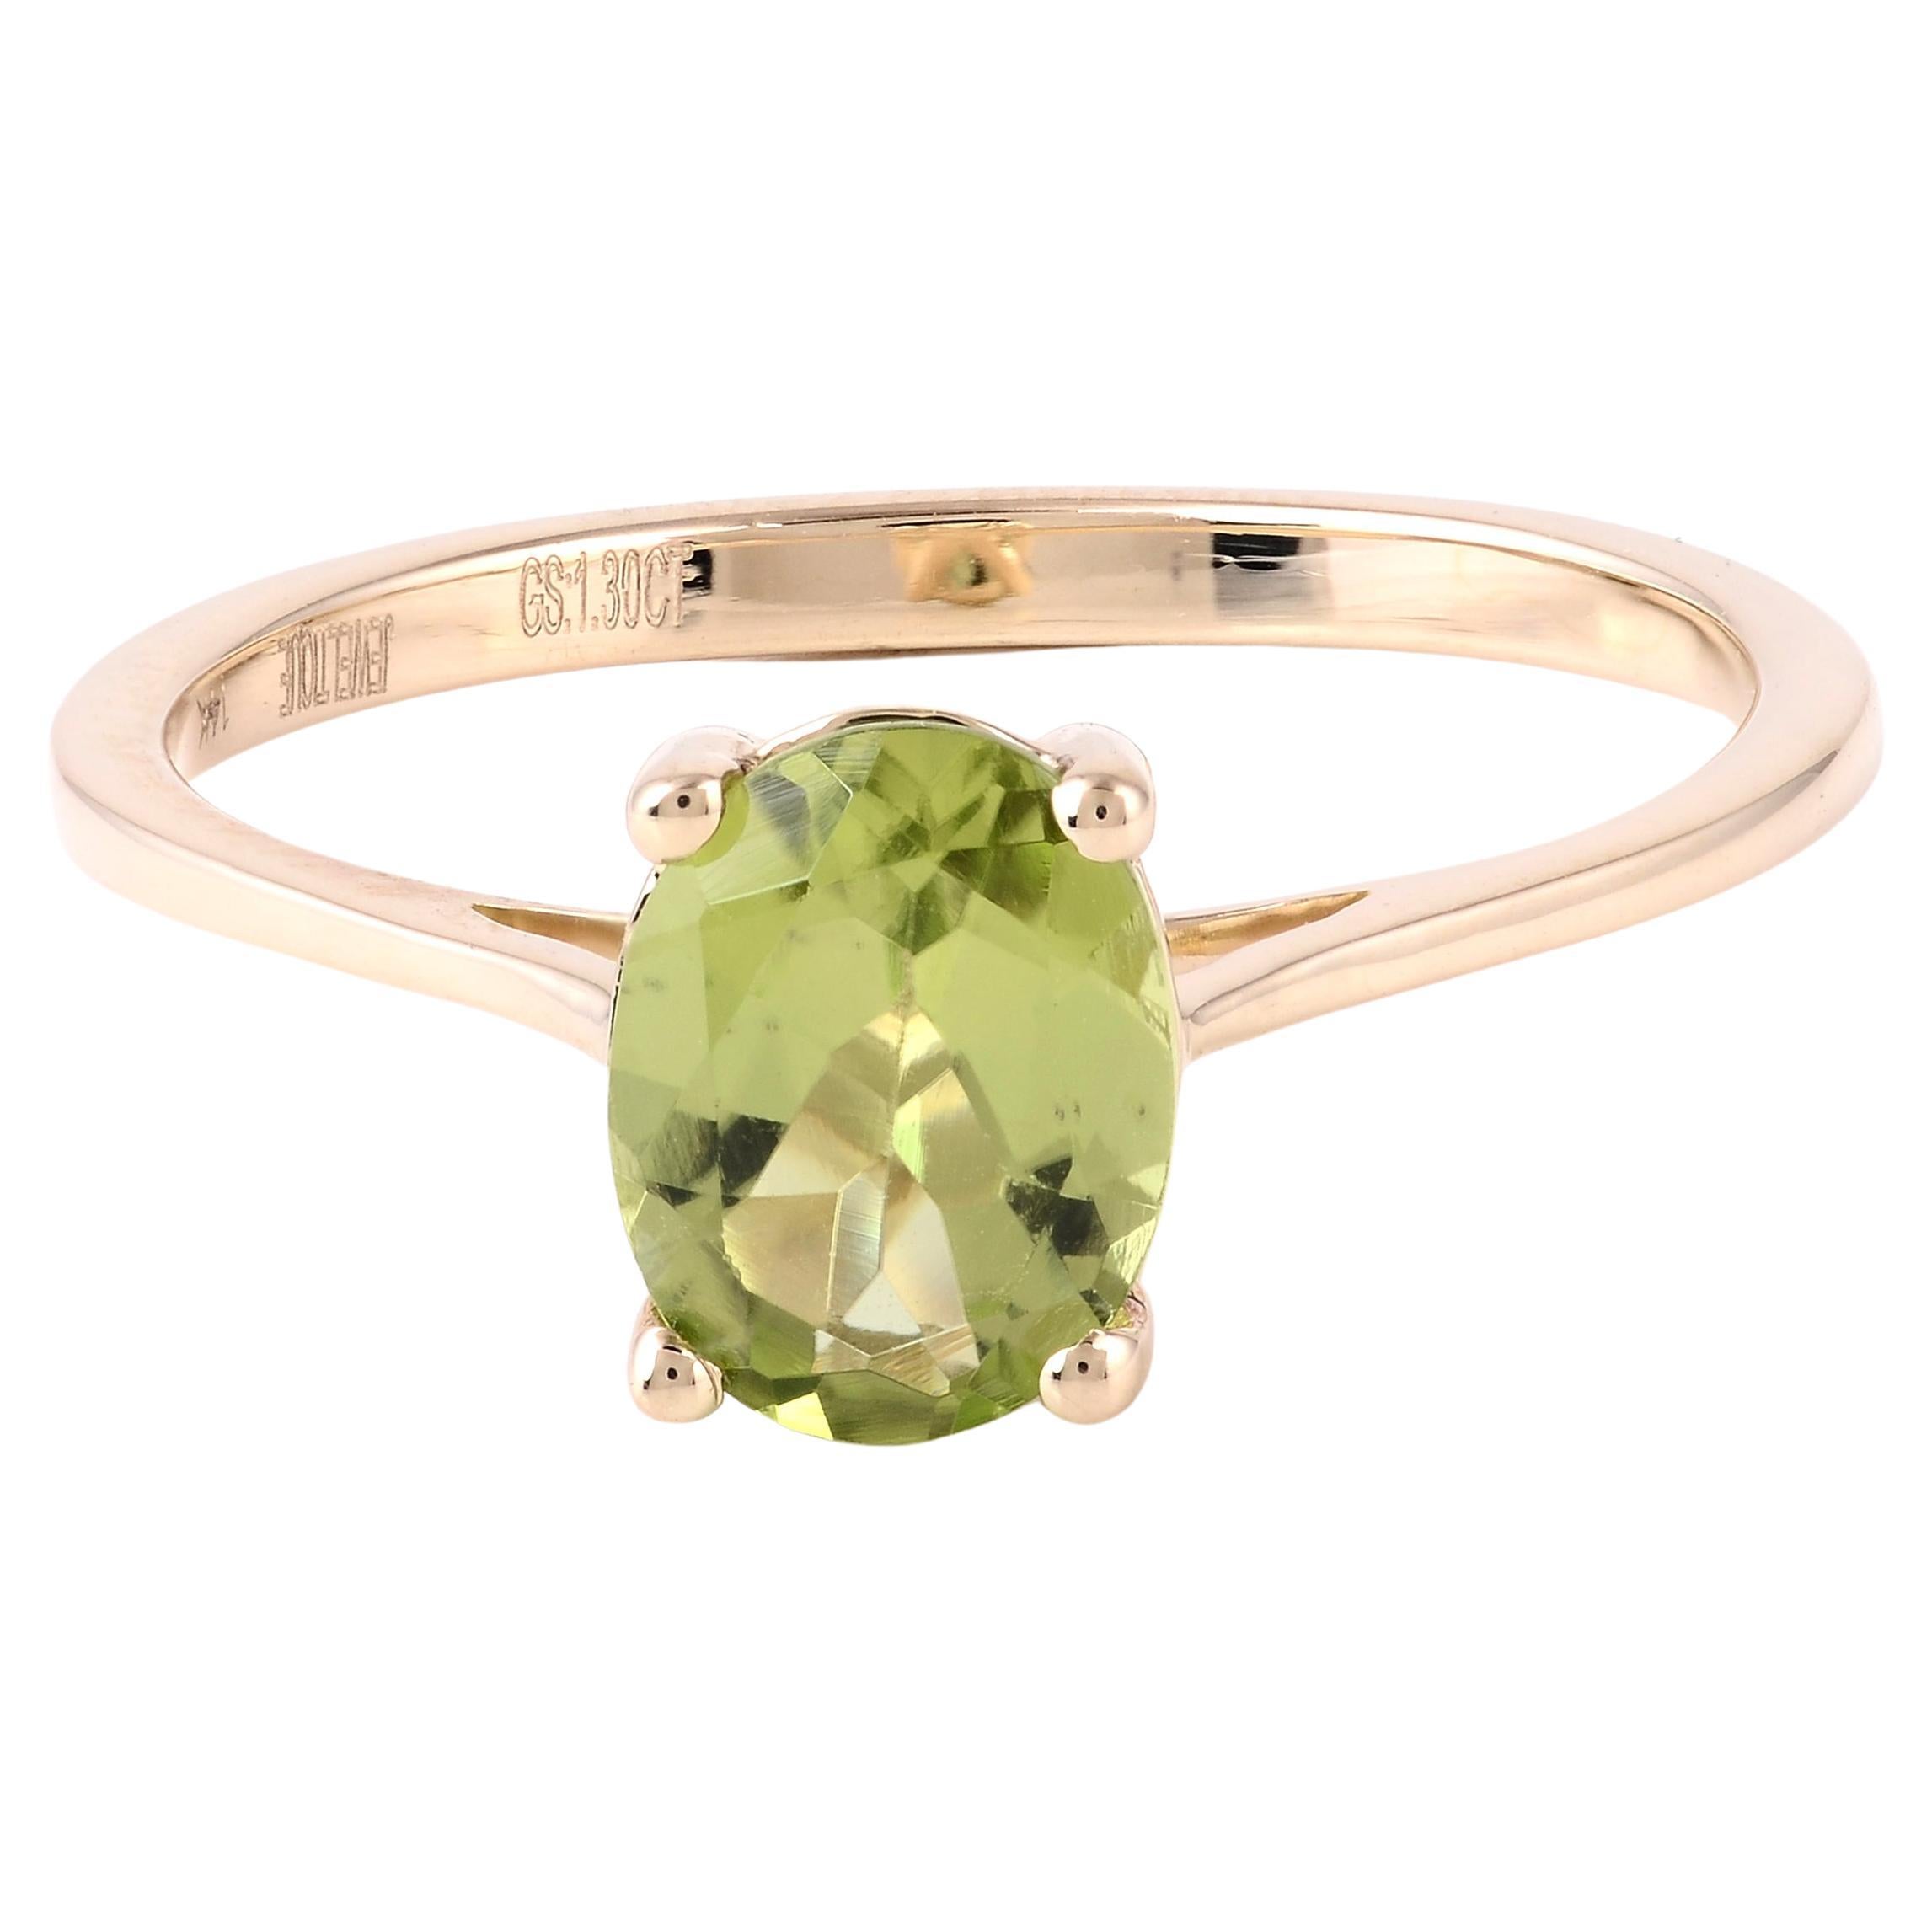 Luxurious 14K 1.30ct Peridot Cocktail Ring, Size 7 - Statement Jewelry Piece For Sale